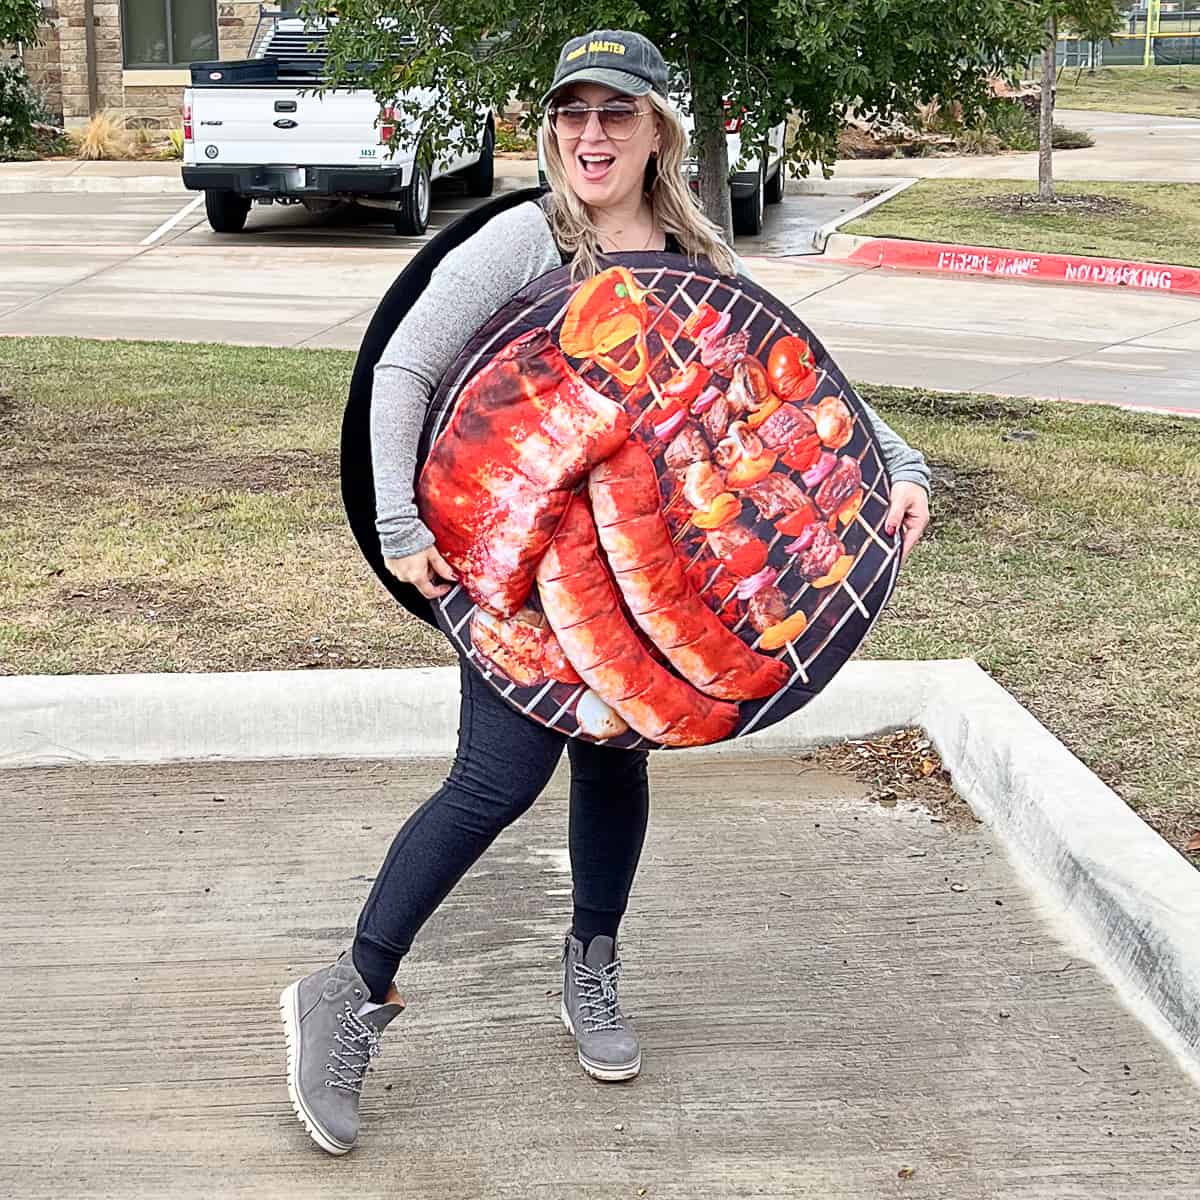 Adult BBQ grill halloween costume for foodies on woman Jenna Passaro food blogger from sip bite go